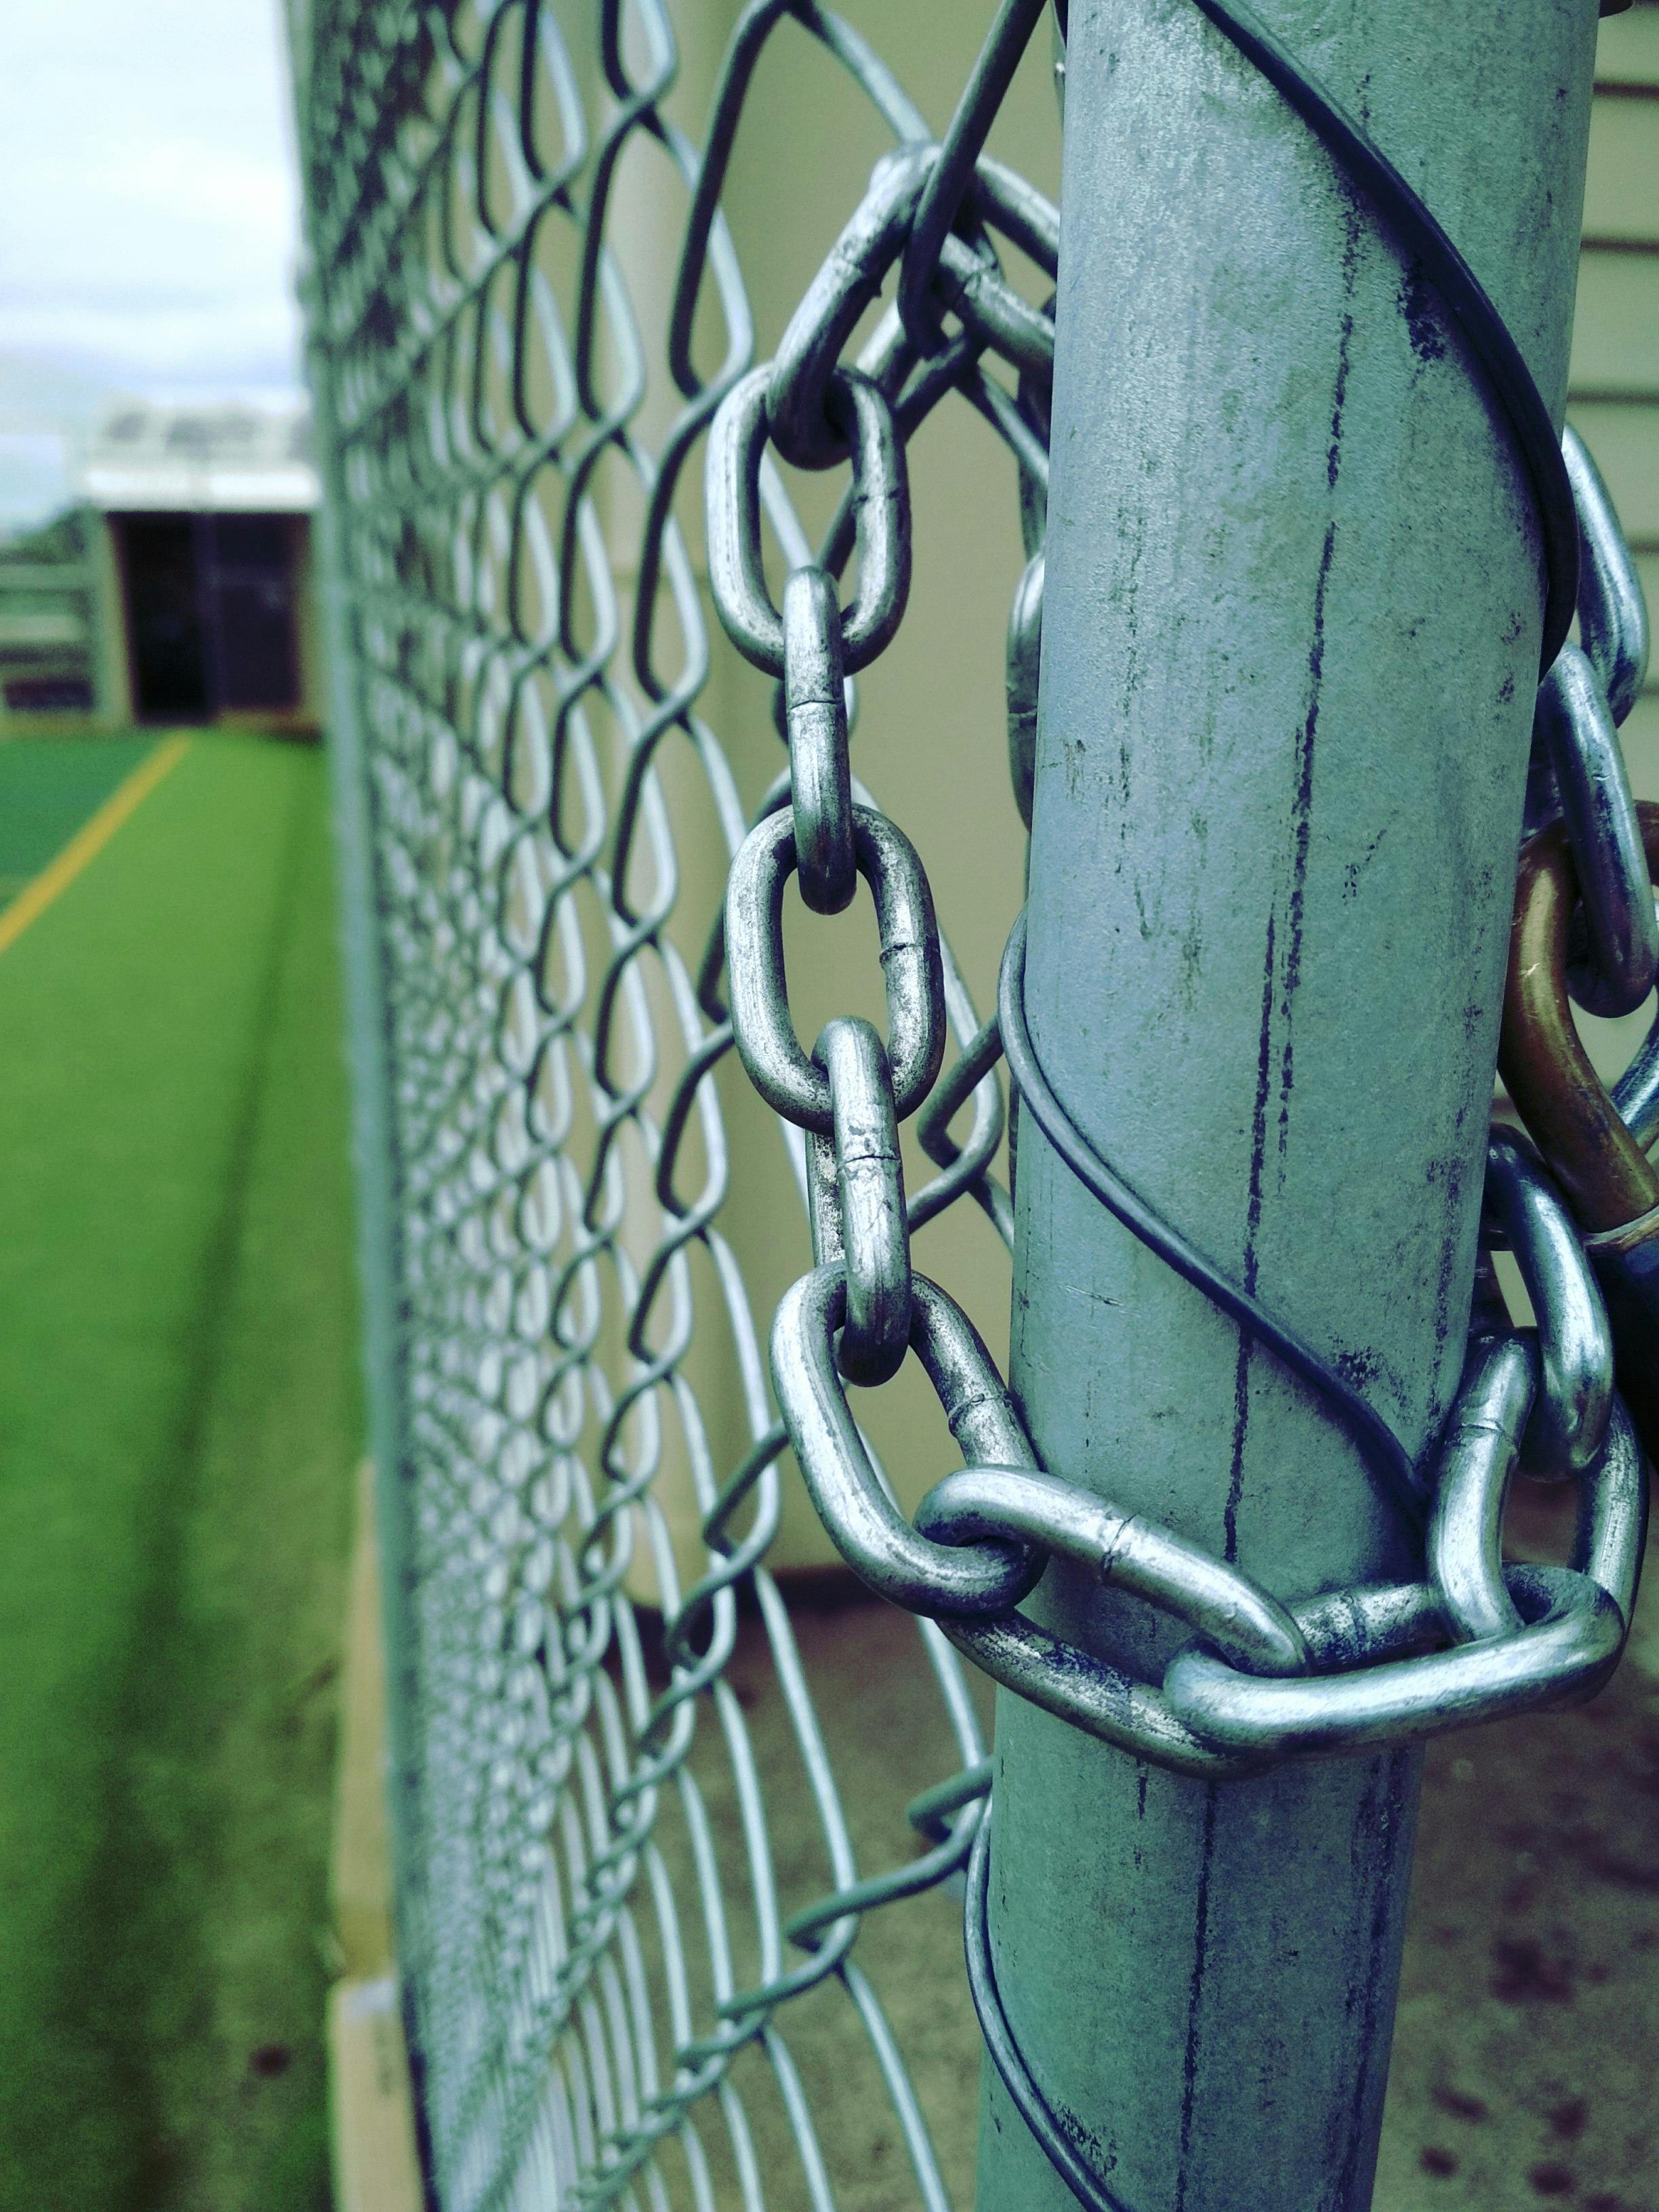 Free stock photo of chain, chain link fence, mobile challenge